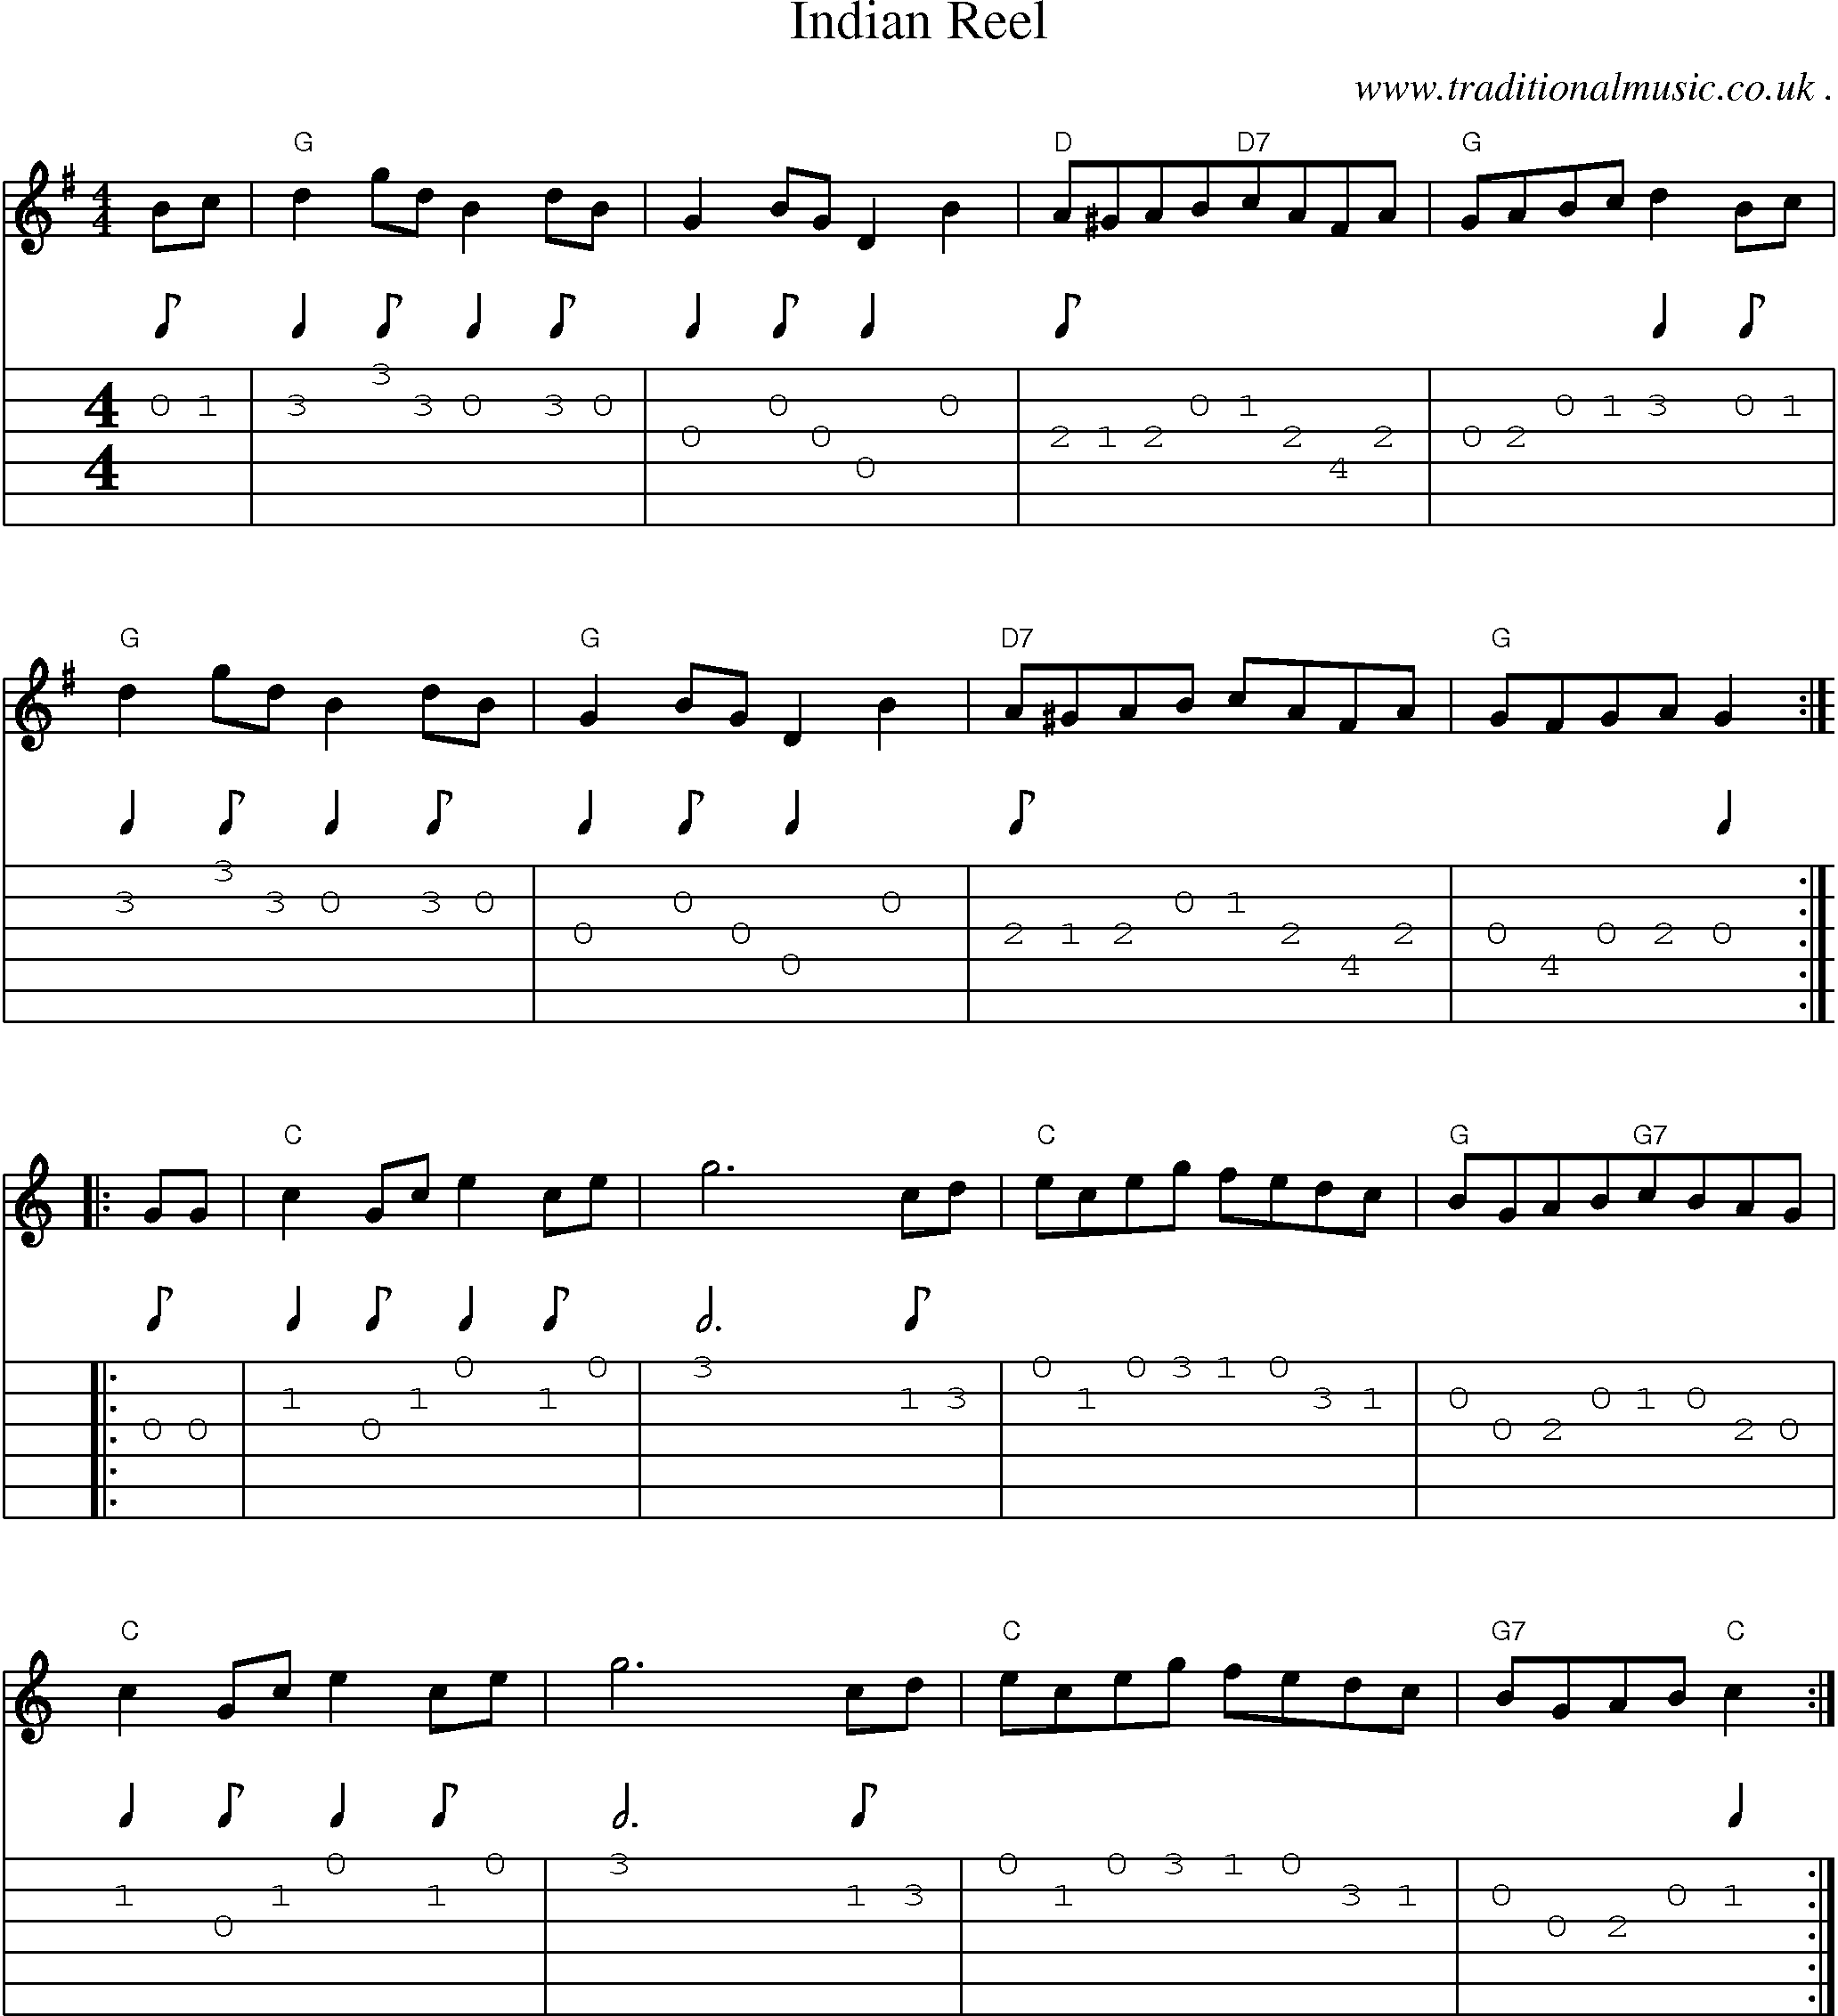 Sheet-Music and Guitar Tabs for Indian Reel